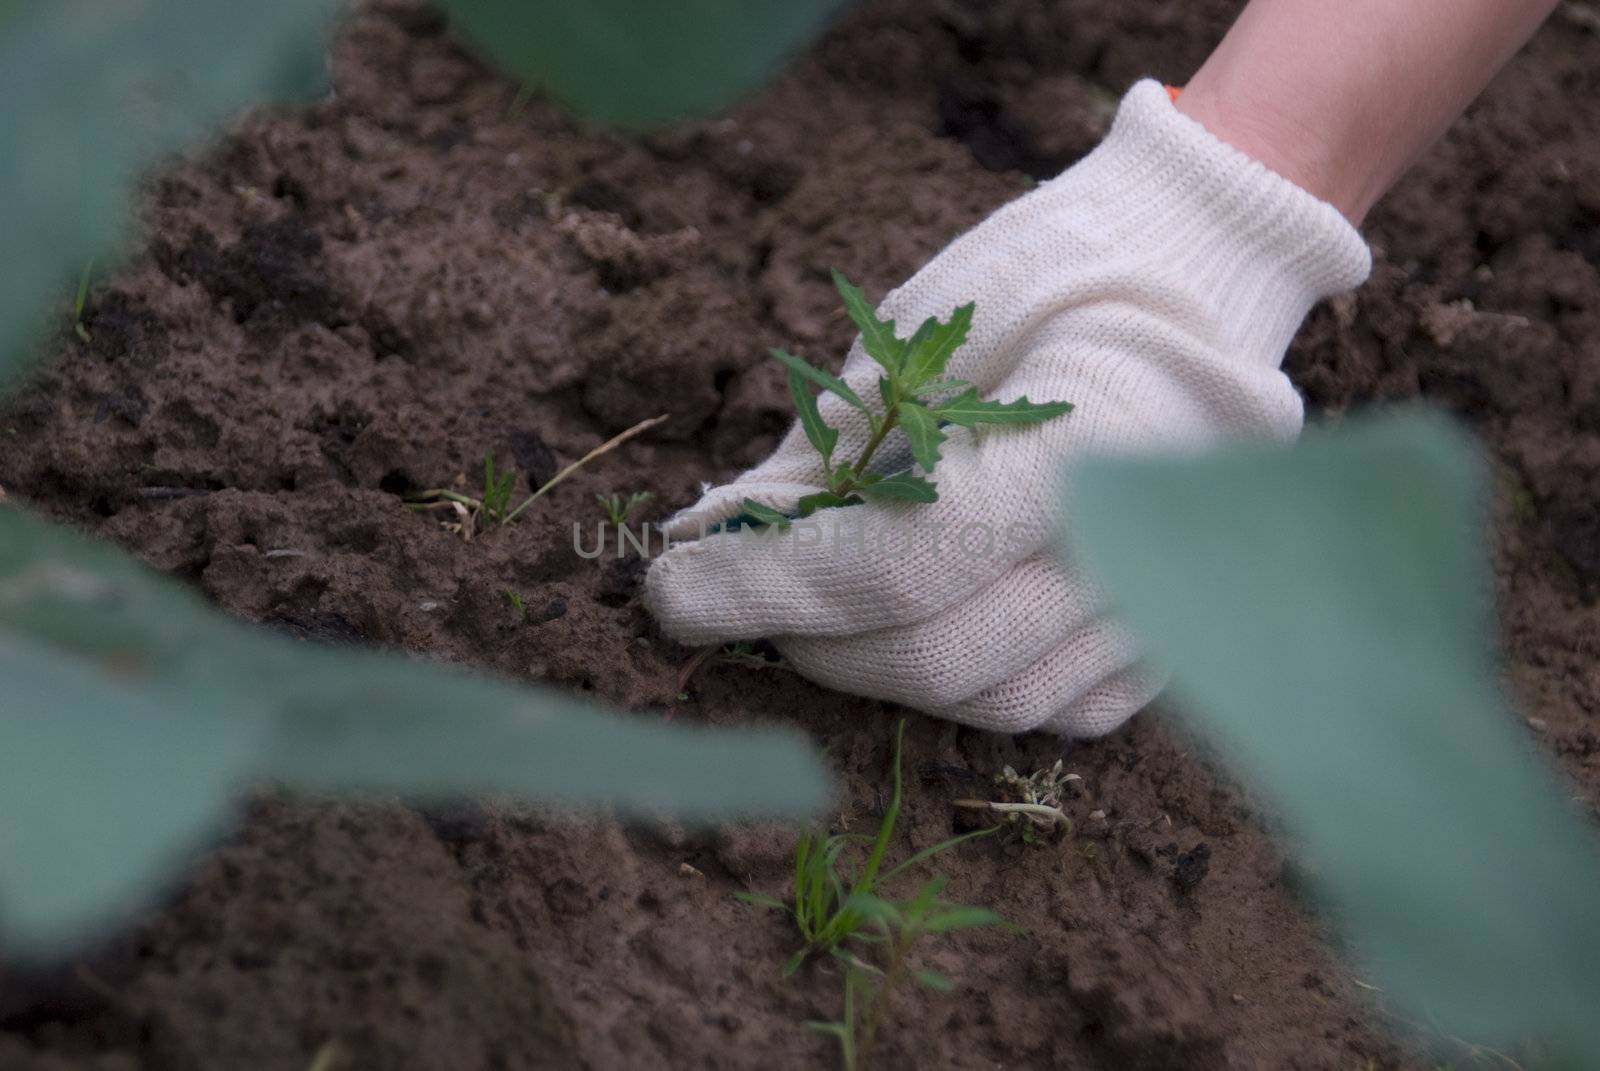 Hands in gloves digging up a weed